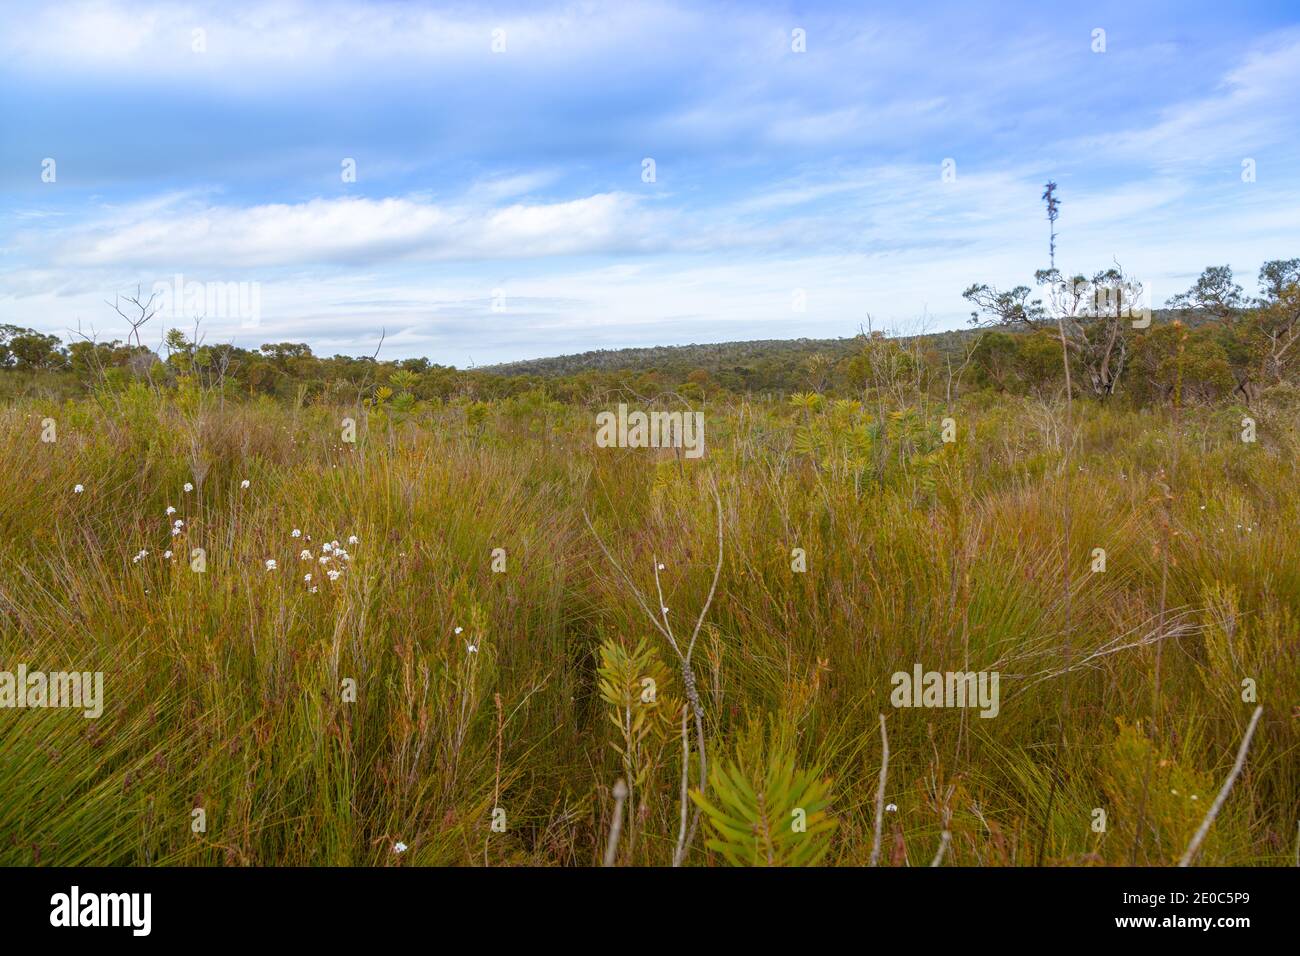 Landscape in the Two Peoples Bay Nature Reserve east of Albany in Western Australia Stock Photo